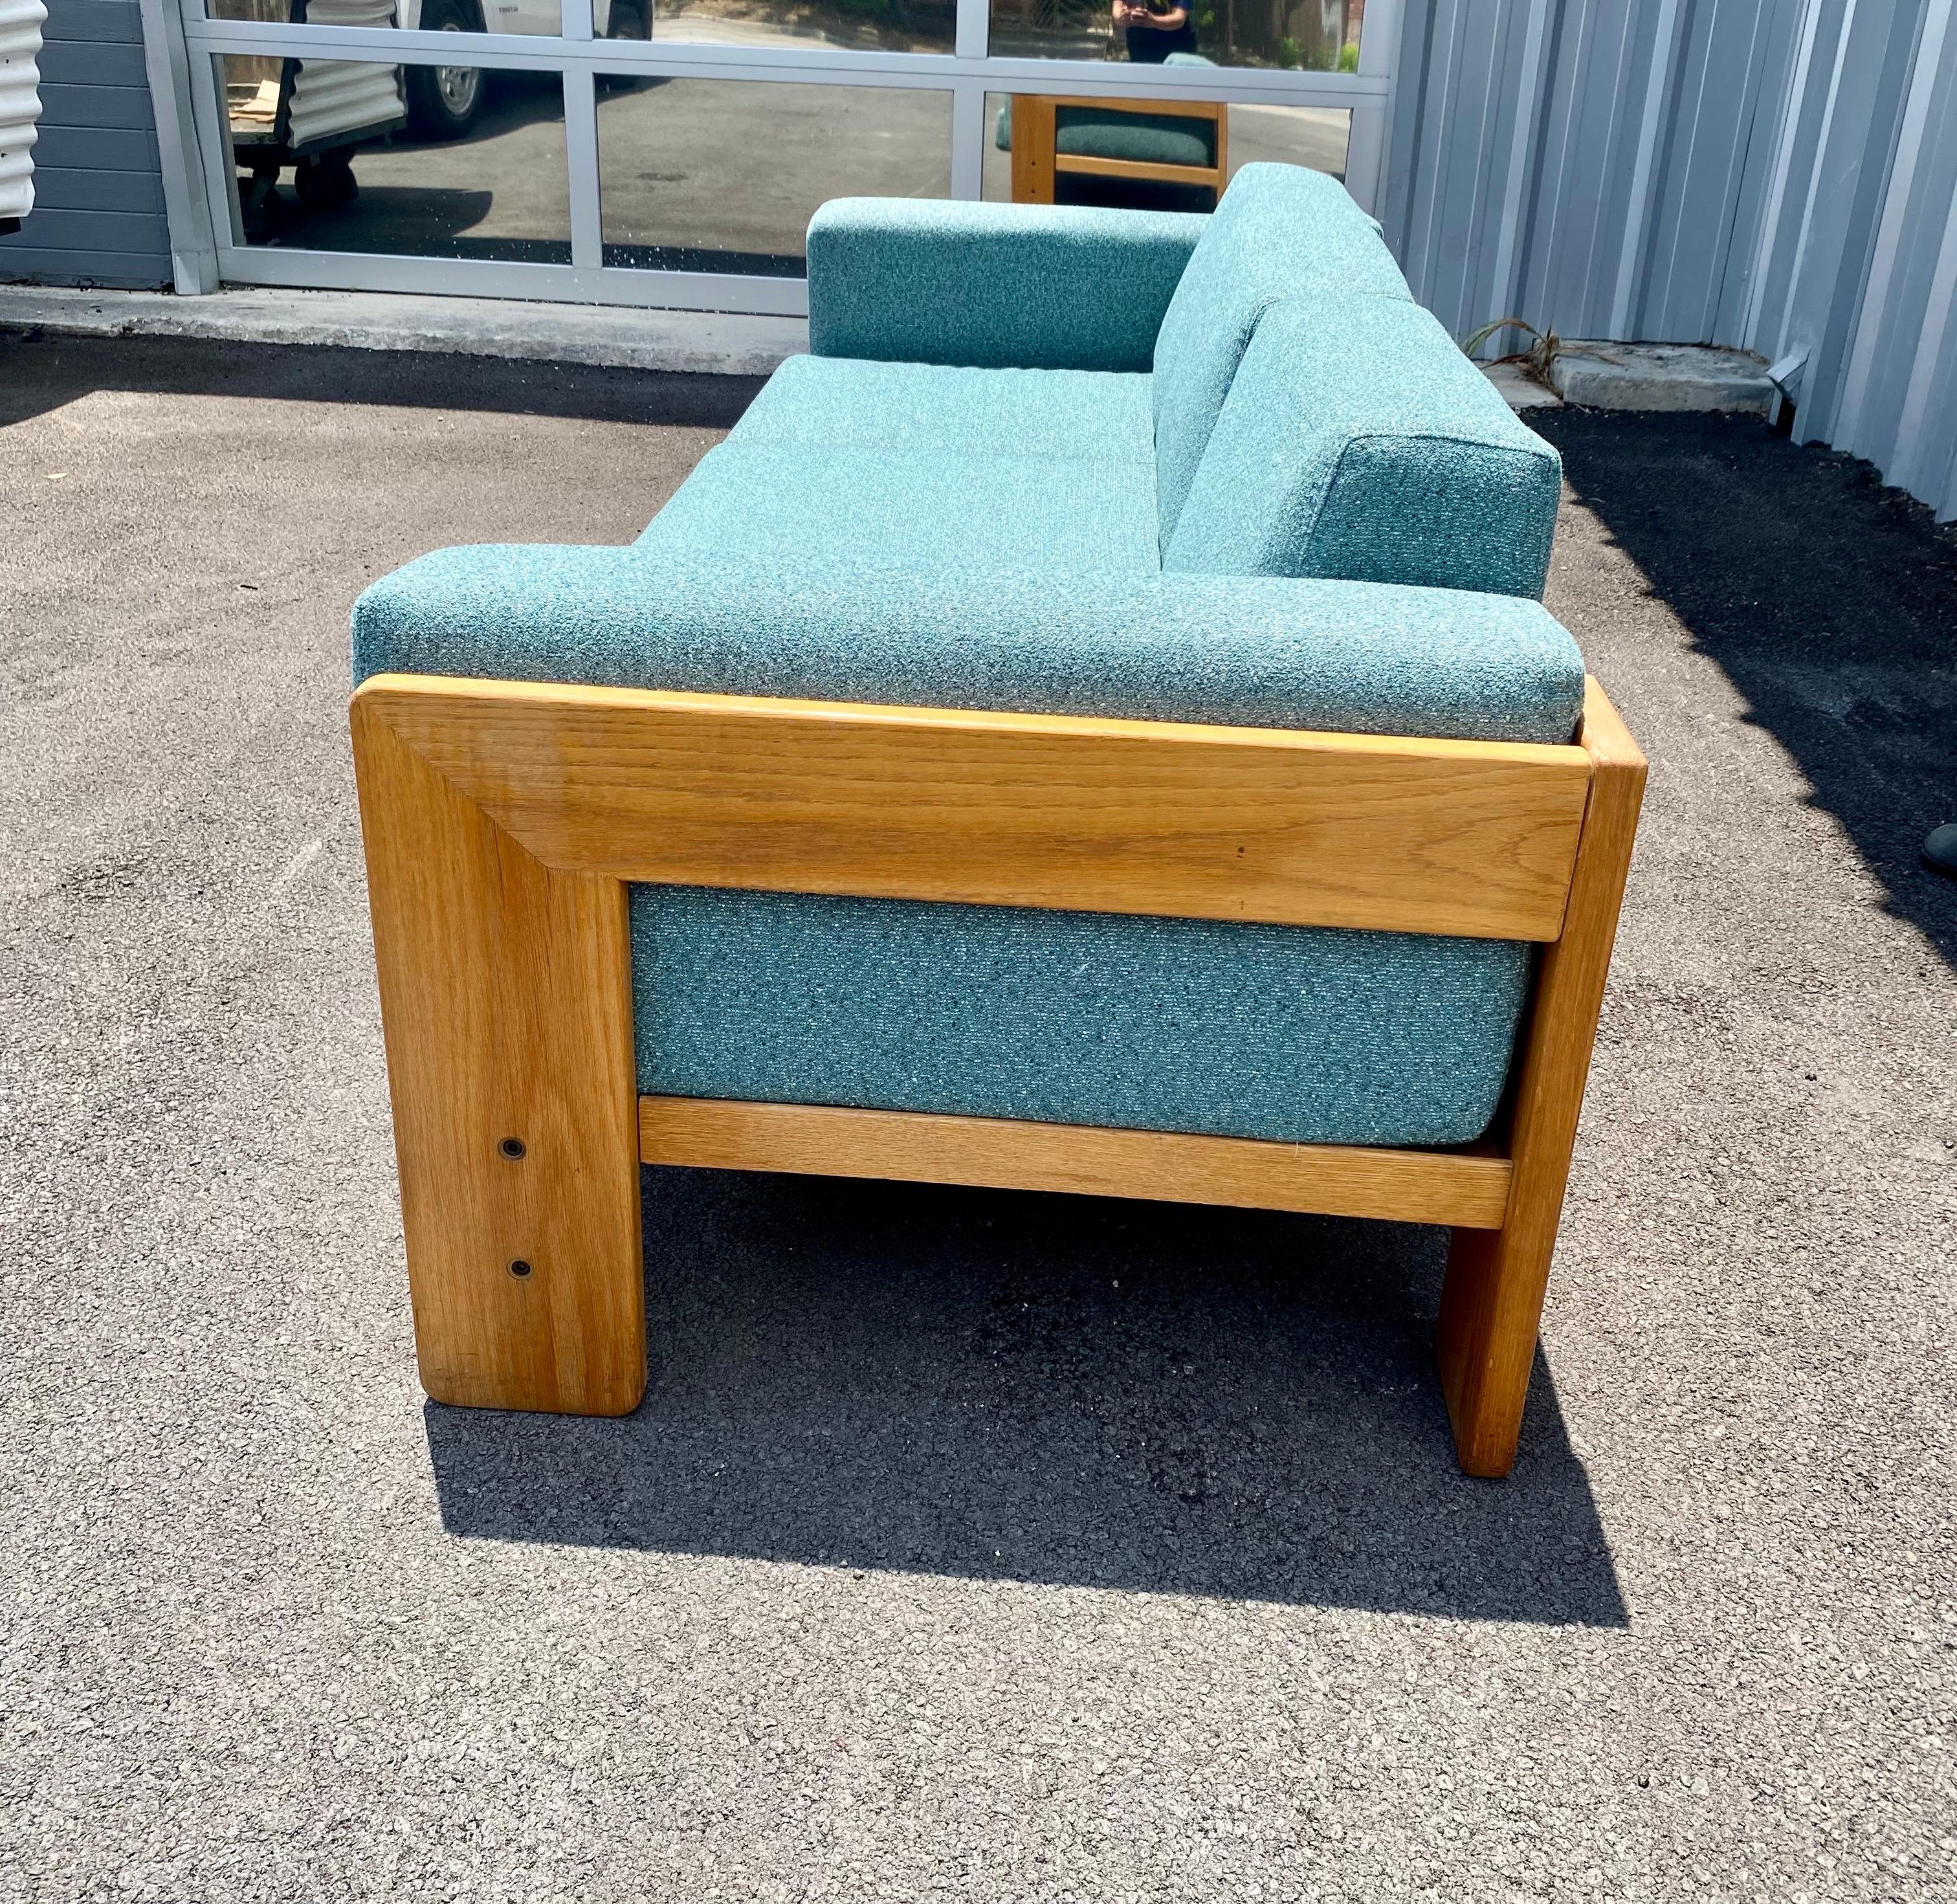 Mid-Century Modern 'Bastiano' sofa by Tobia Scarpa for Knoll. This vintage three-seater sofa features a sturdy oak frame and upholstered in a beautiful turquoise fabric, Italy, 1960s. Sofa is in great overall condition. 

When Tobia Scarpa